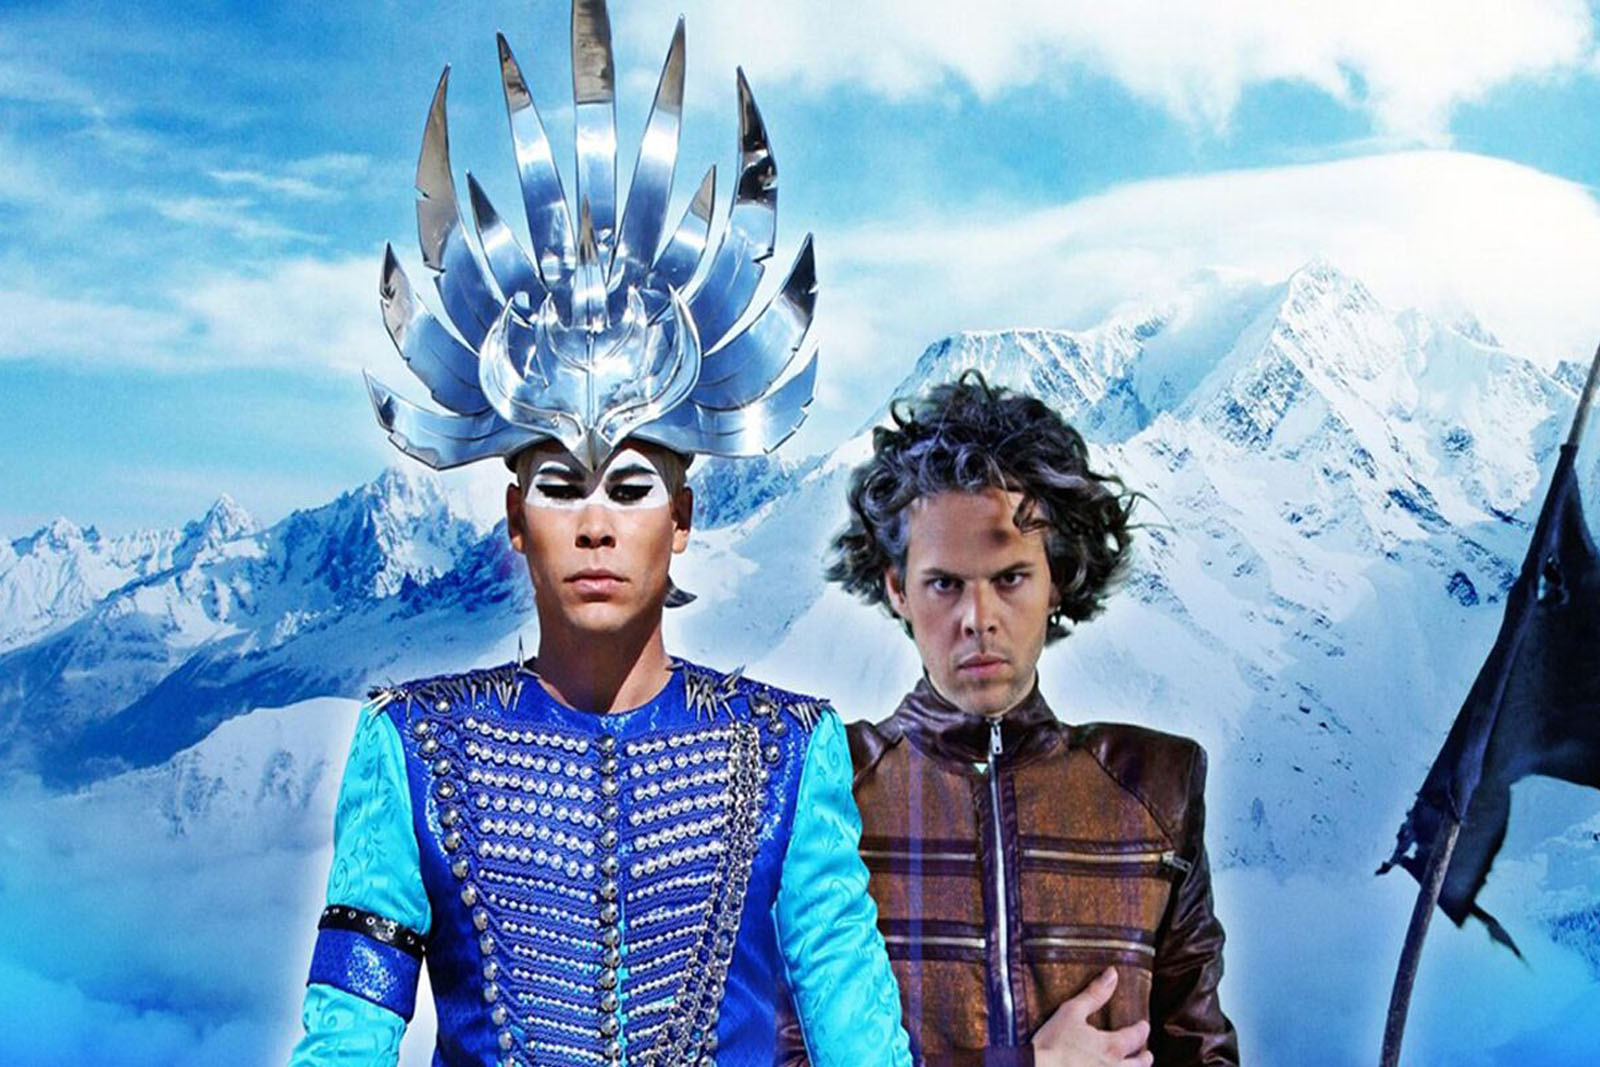 empire of the sun, two vines, reseñas discos, soy roger, blog